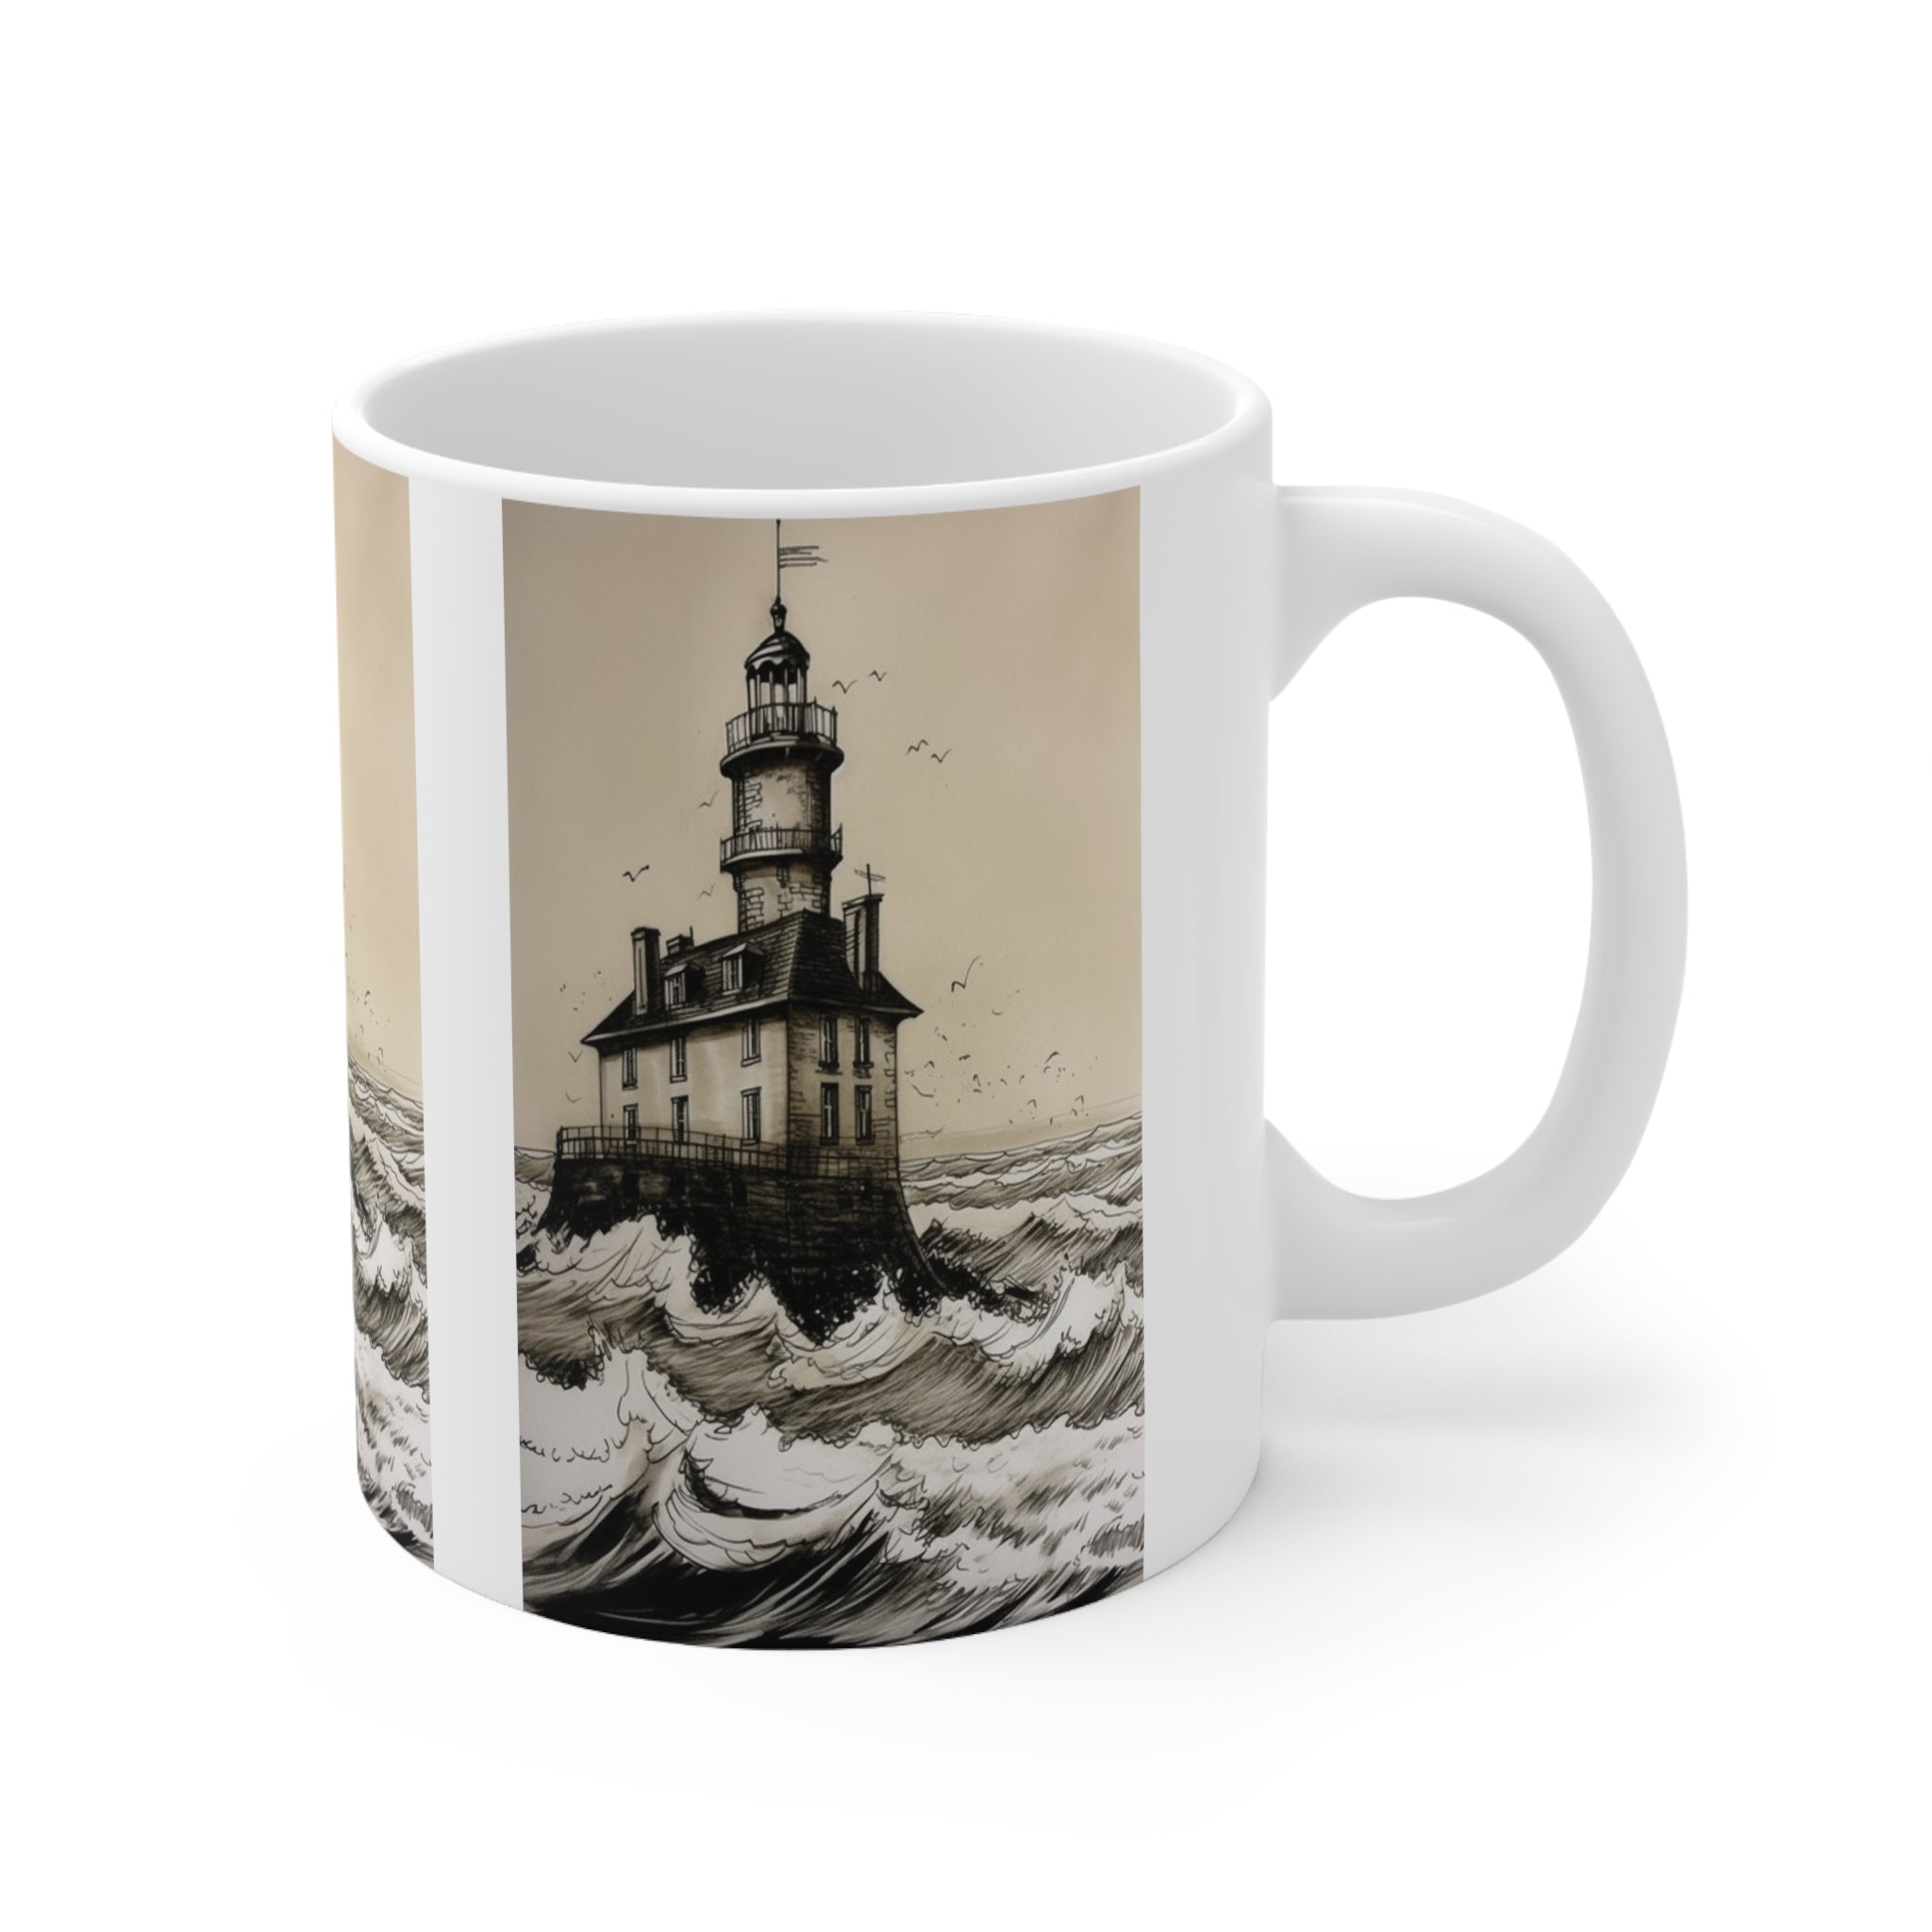 Combo "Lighthouse Against the White Surf of Waves" Ceramic Mug 11oz and Gratitude Journal - Coastal Charm & Nautical Elegance for Coffee Lovers Gift for Teachers Gift for Employees or Boss